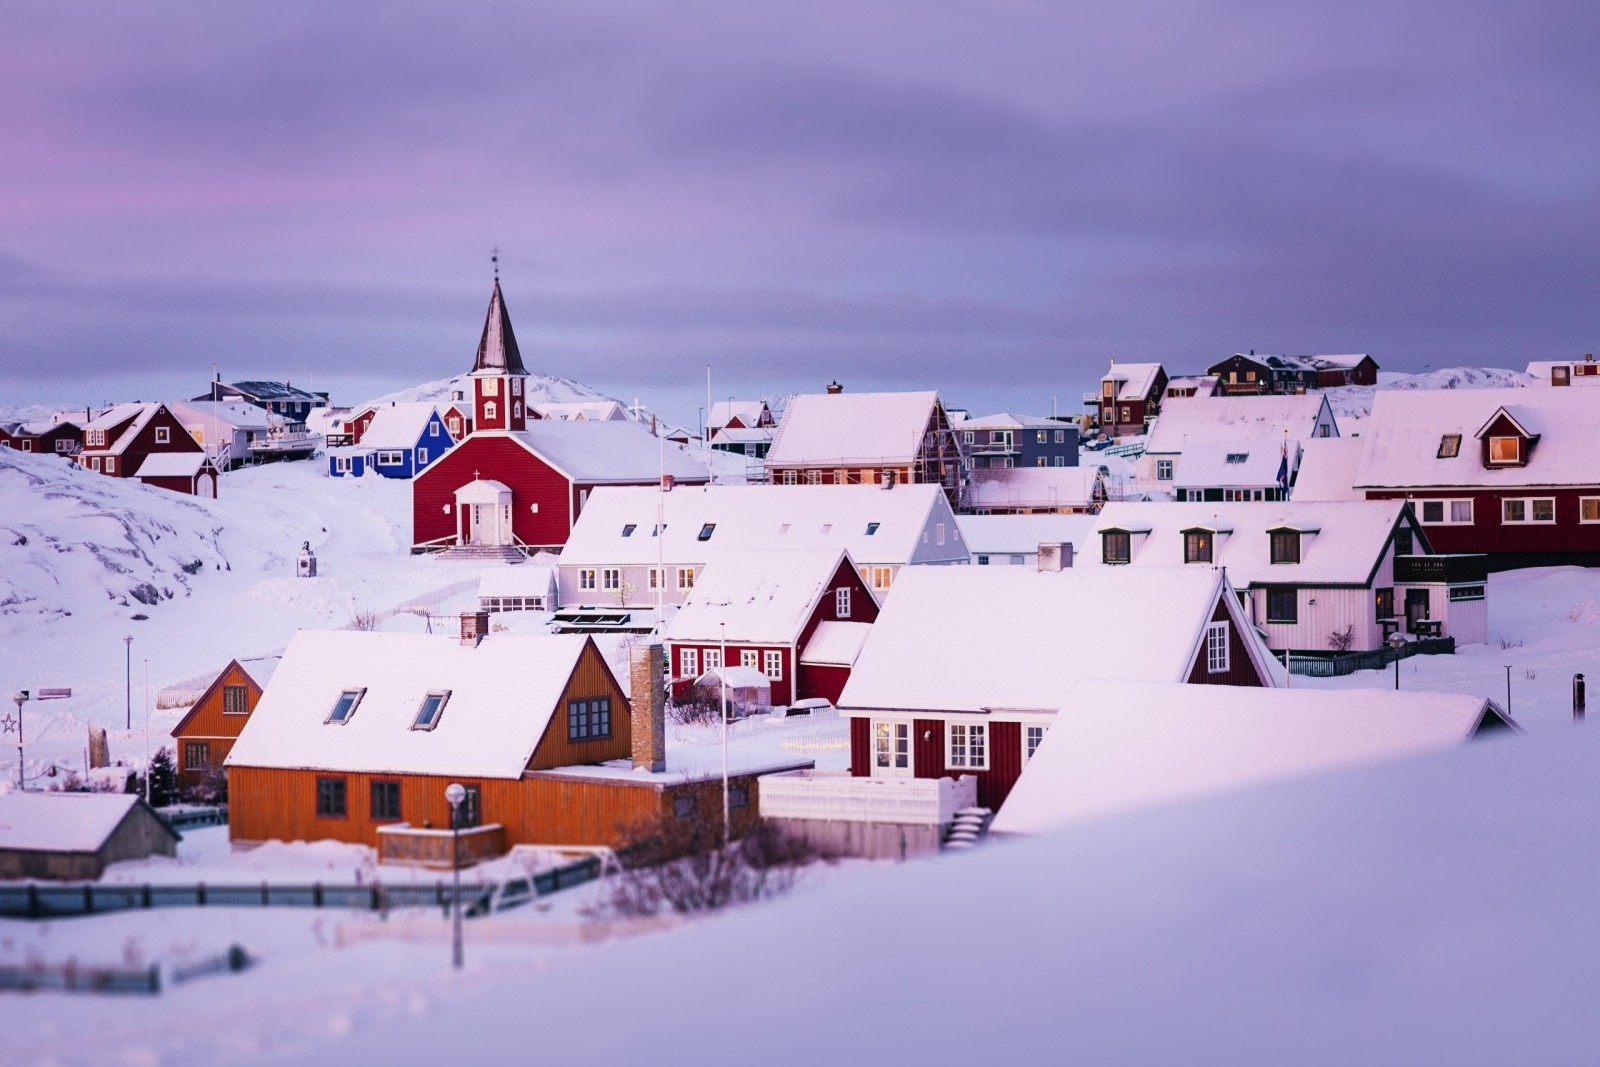 Before-The Red Church and the Old Nuuk area